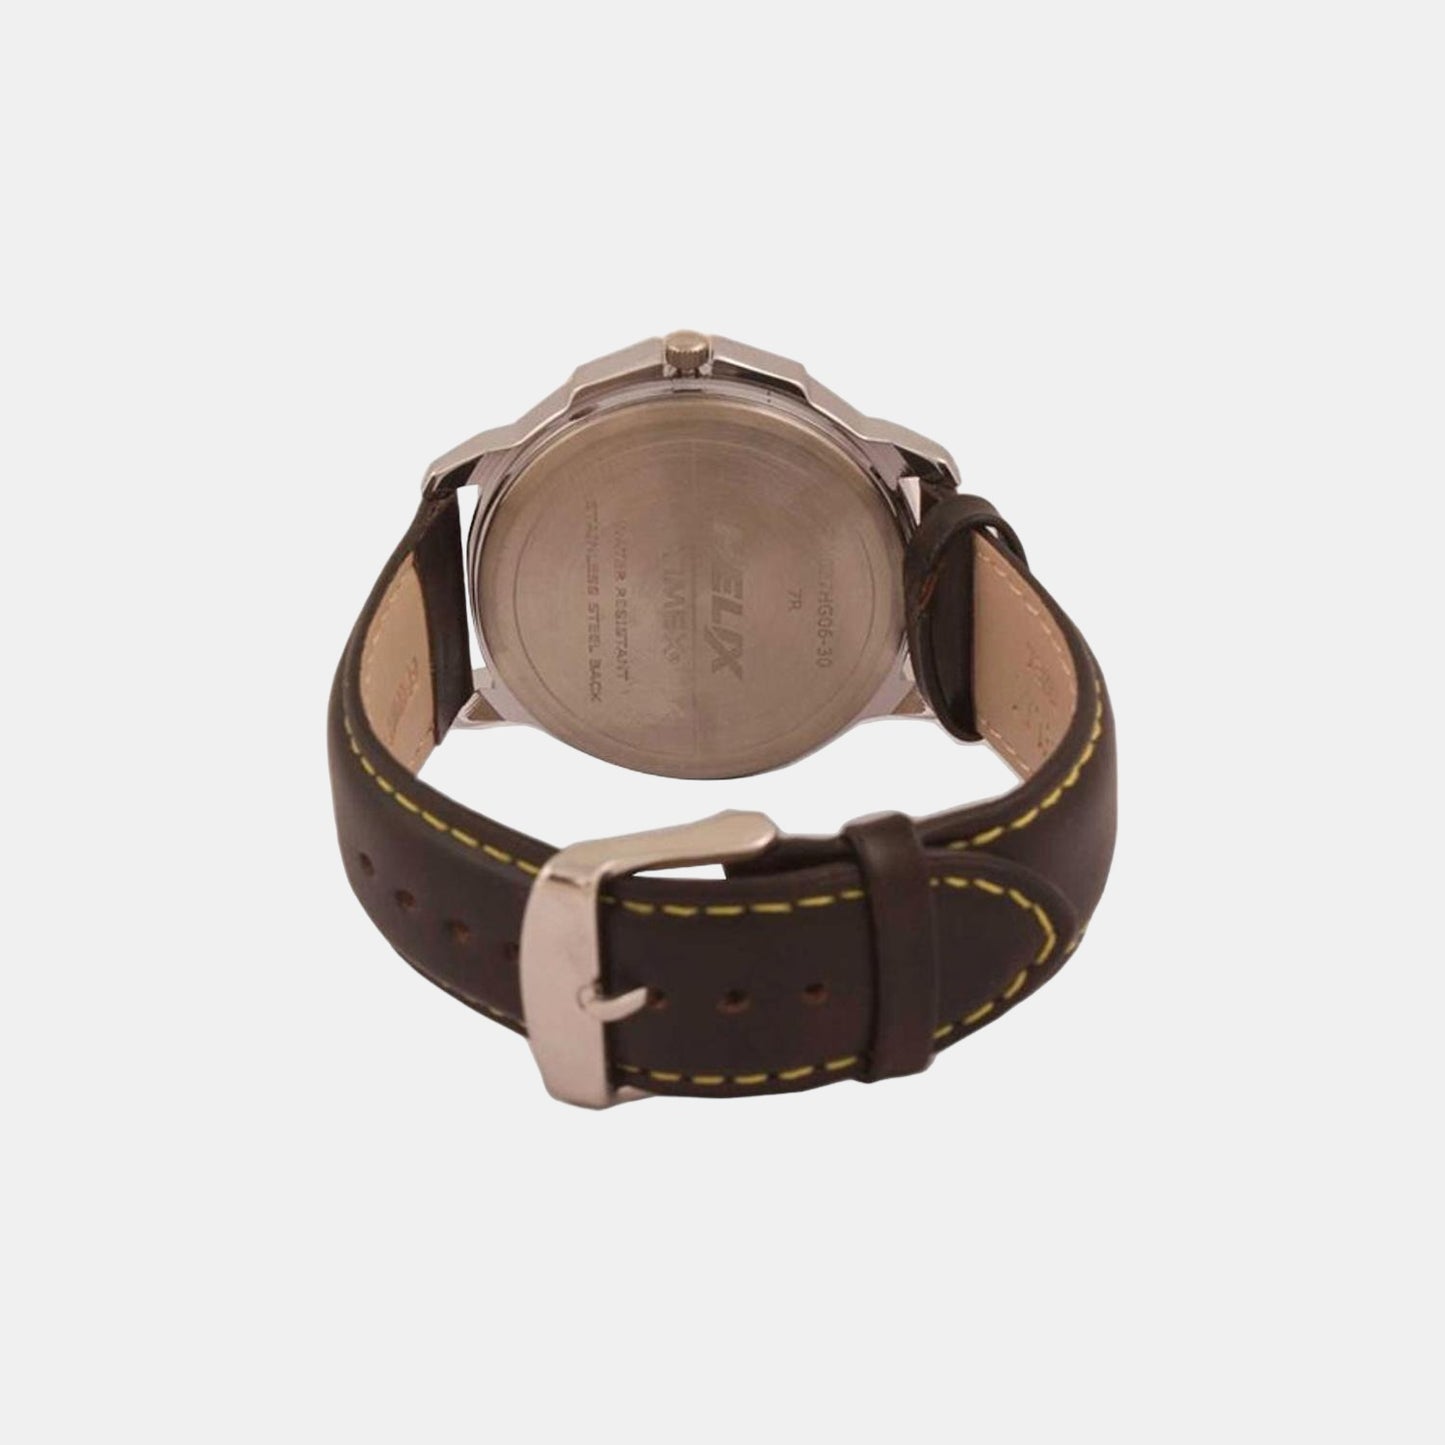 Male Brown Analog Leather Watch TW027HG06